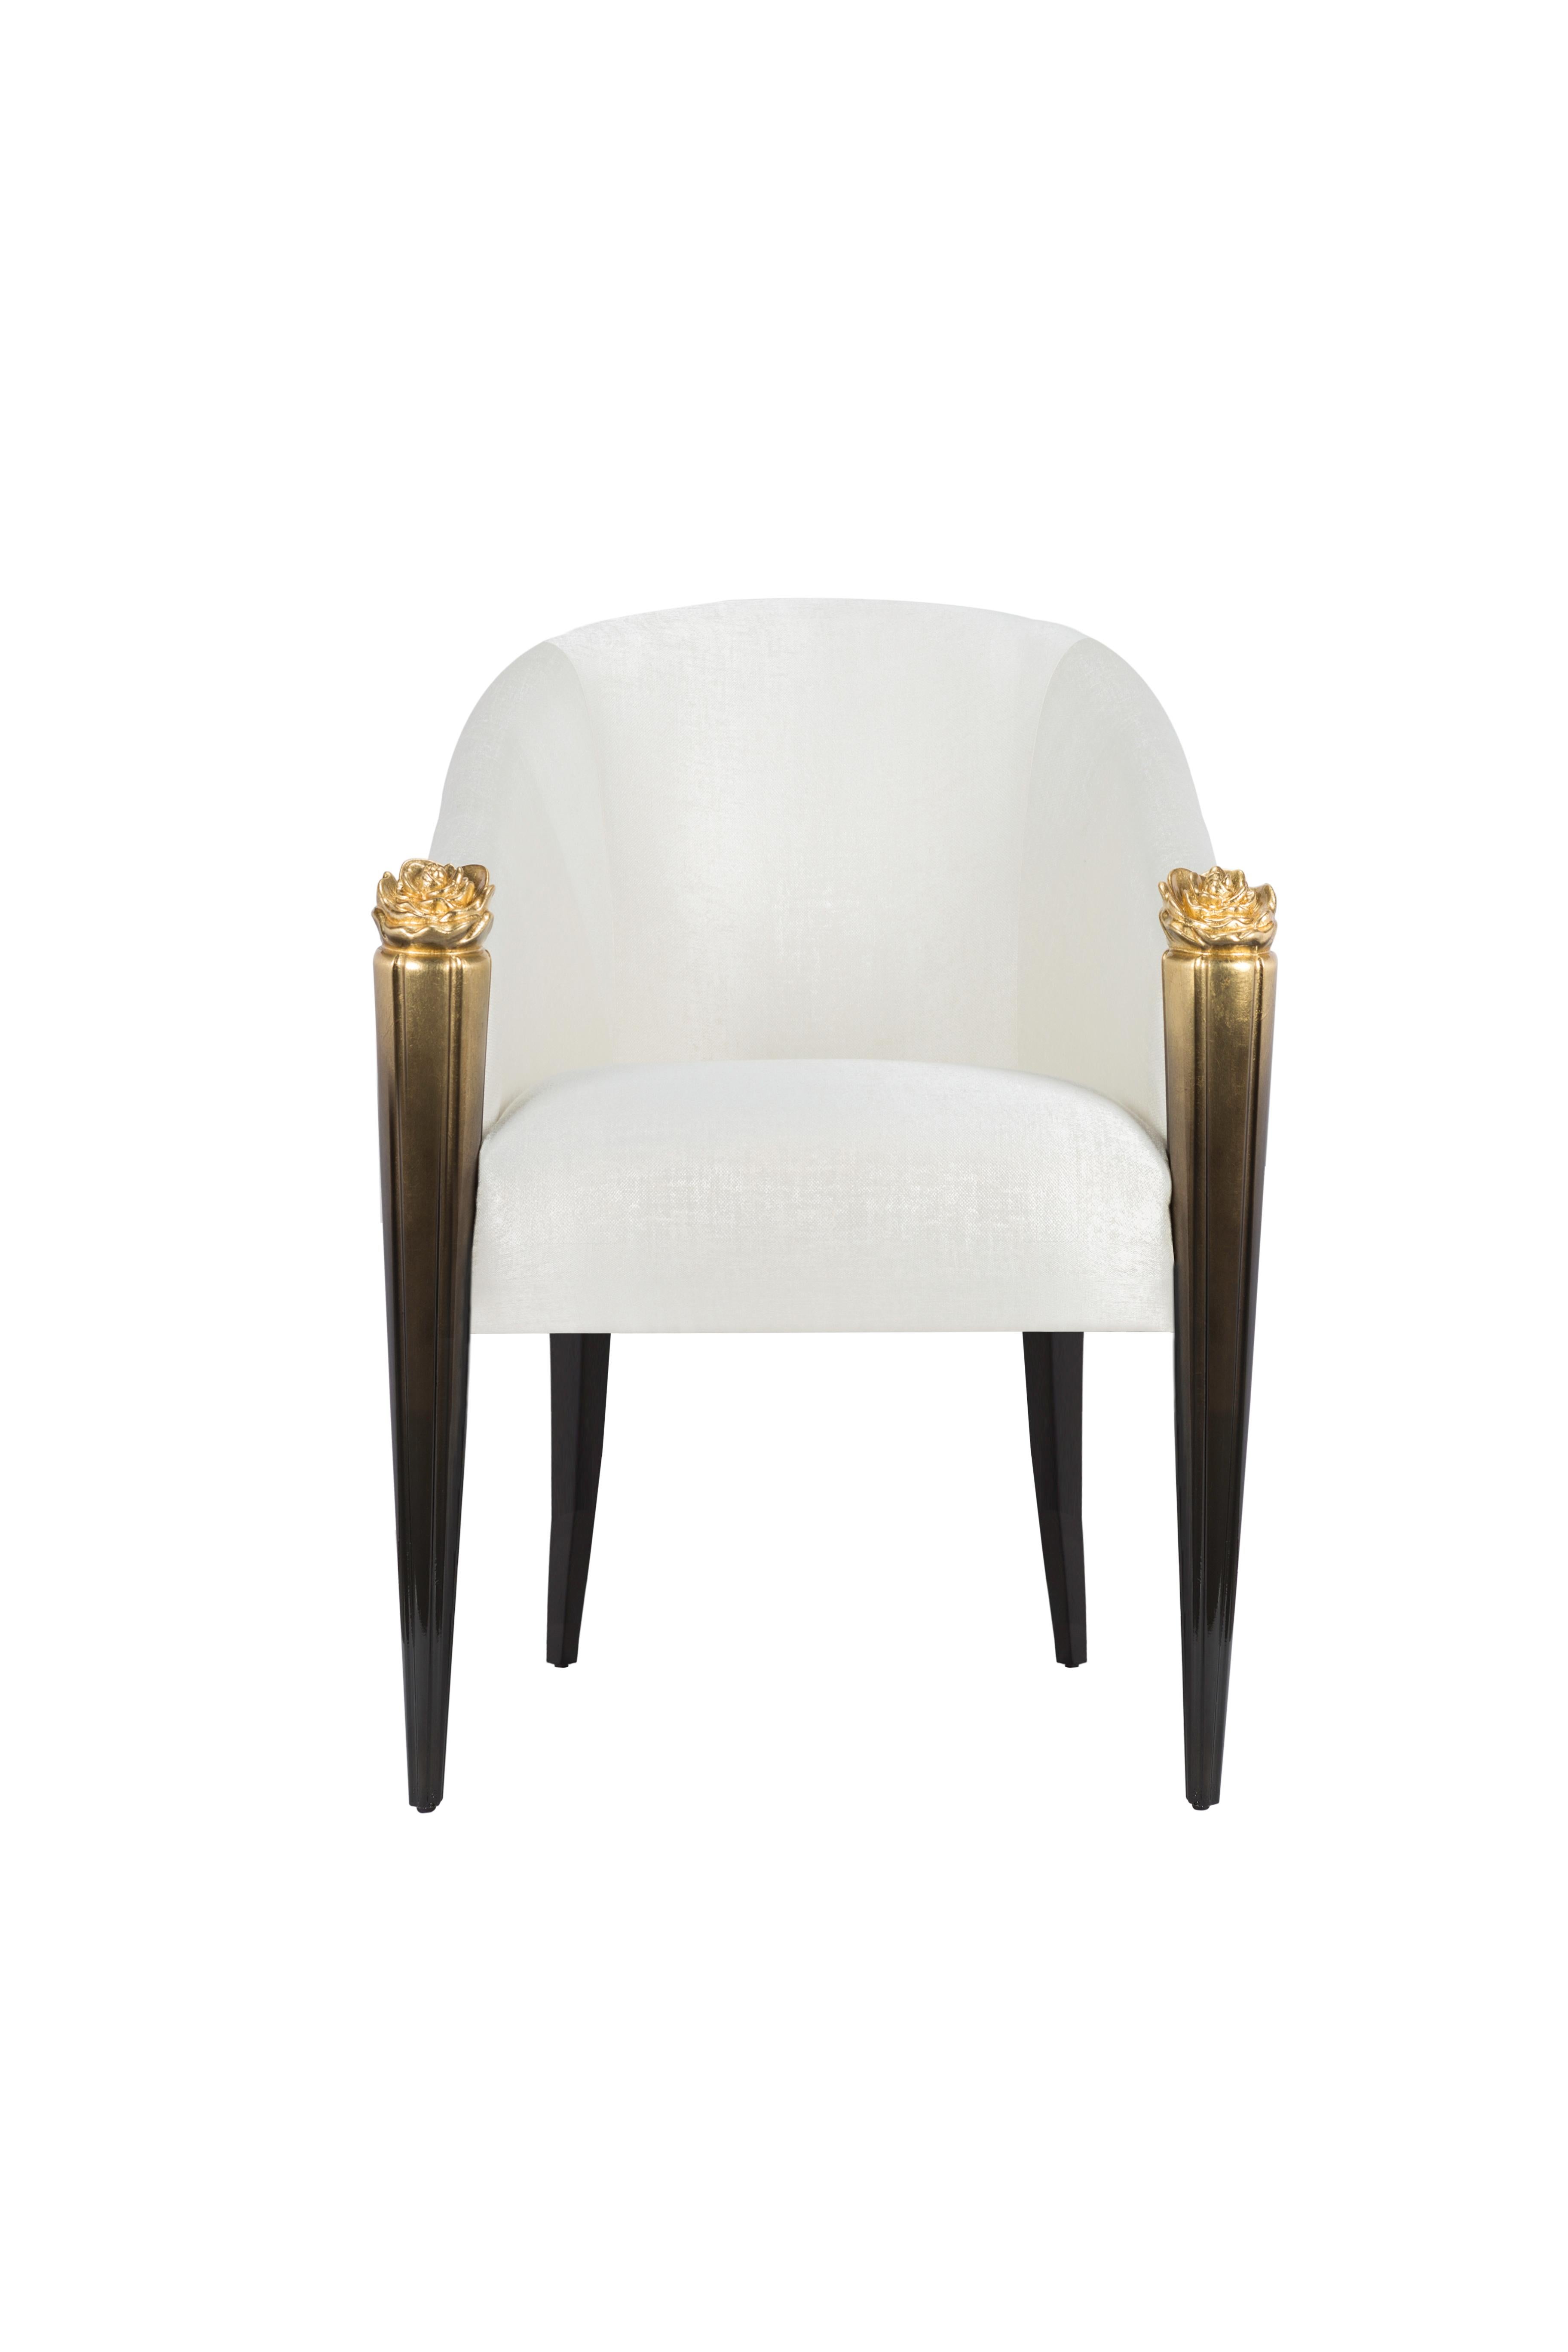 Blossom Dining Chair by Memoir Essence
Dimensions: D 64 x W 62 x H 82 cm.
Materials: Gold Leaf with black lacquer gradient and textured satin fabric KY 1 Snow White.

Also available in client's fabric. Please contact us.

With organic and smooth